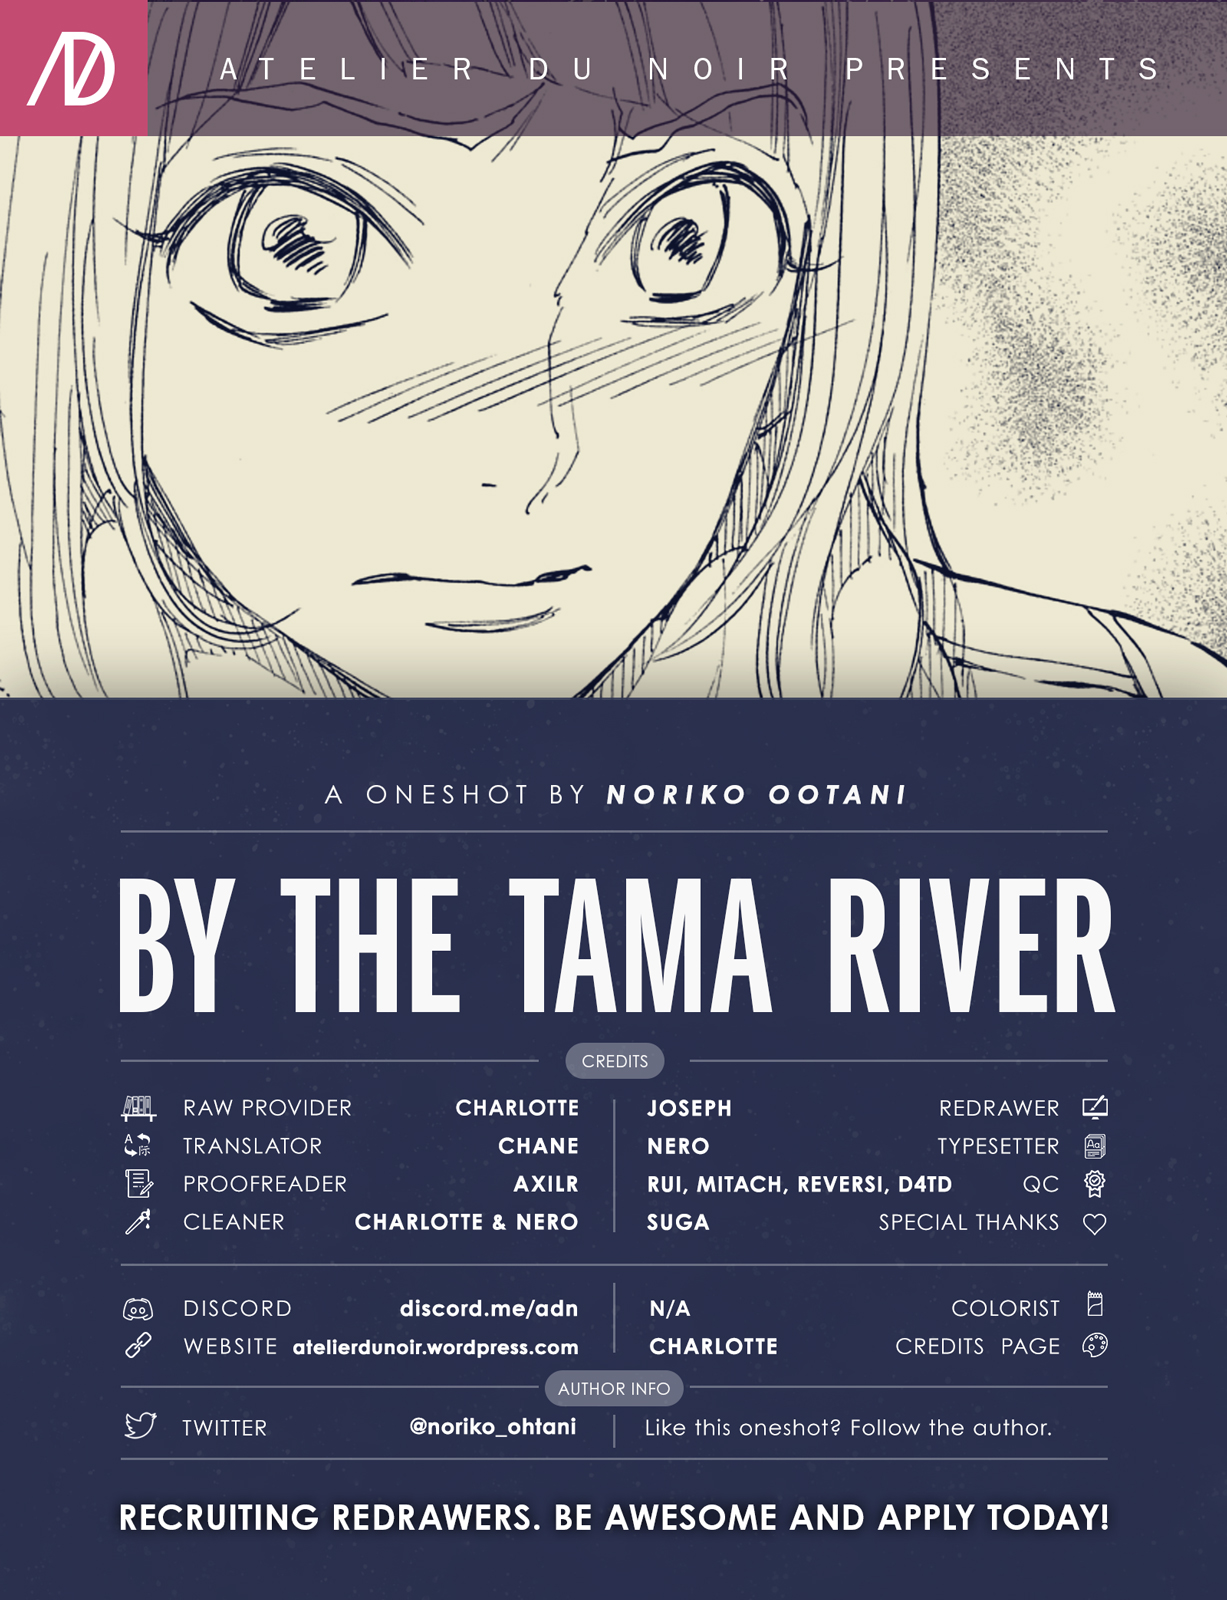 By the Tama River Oneshot